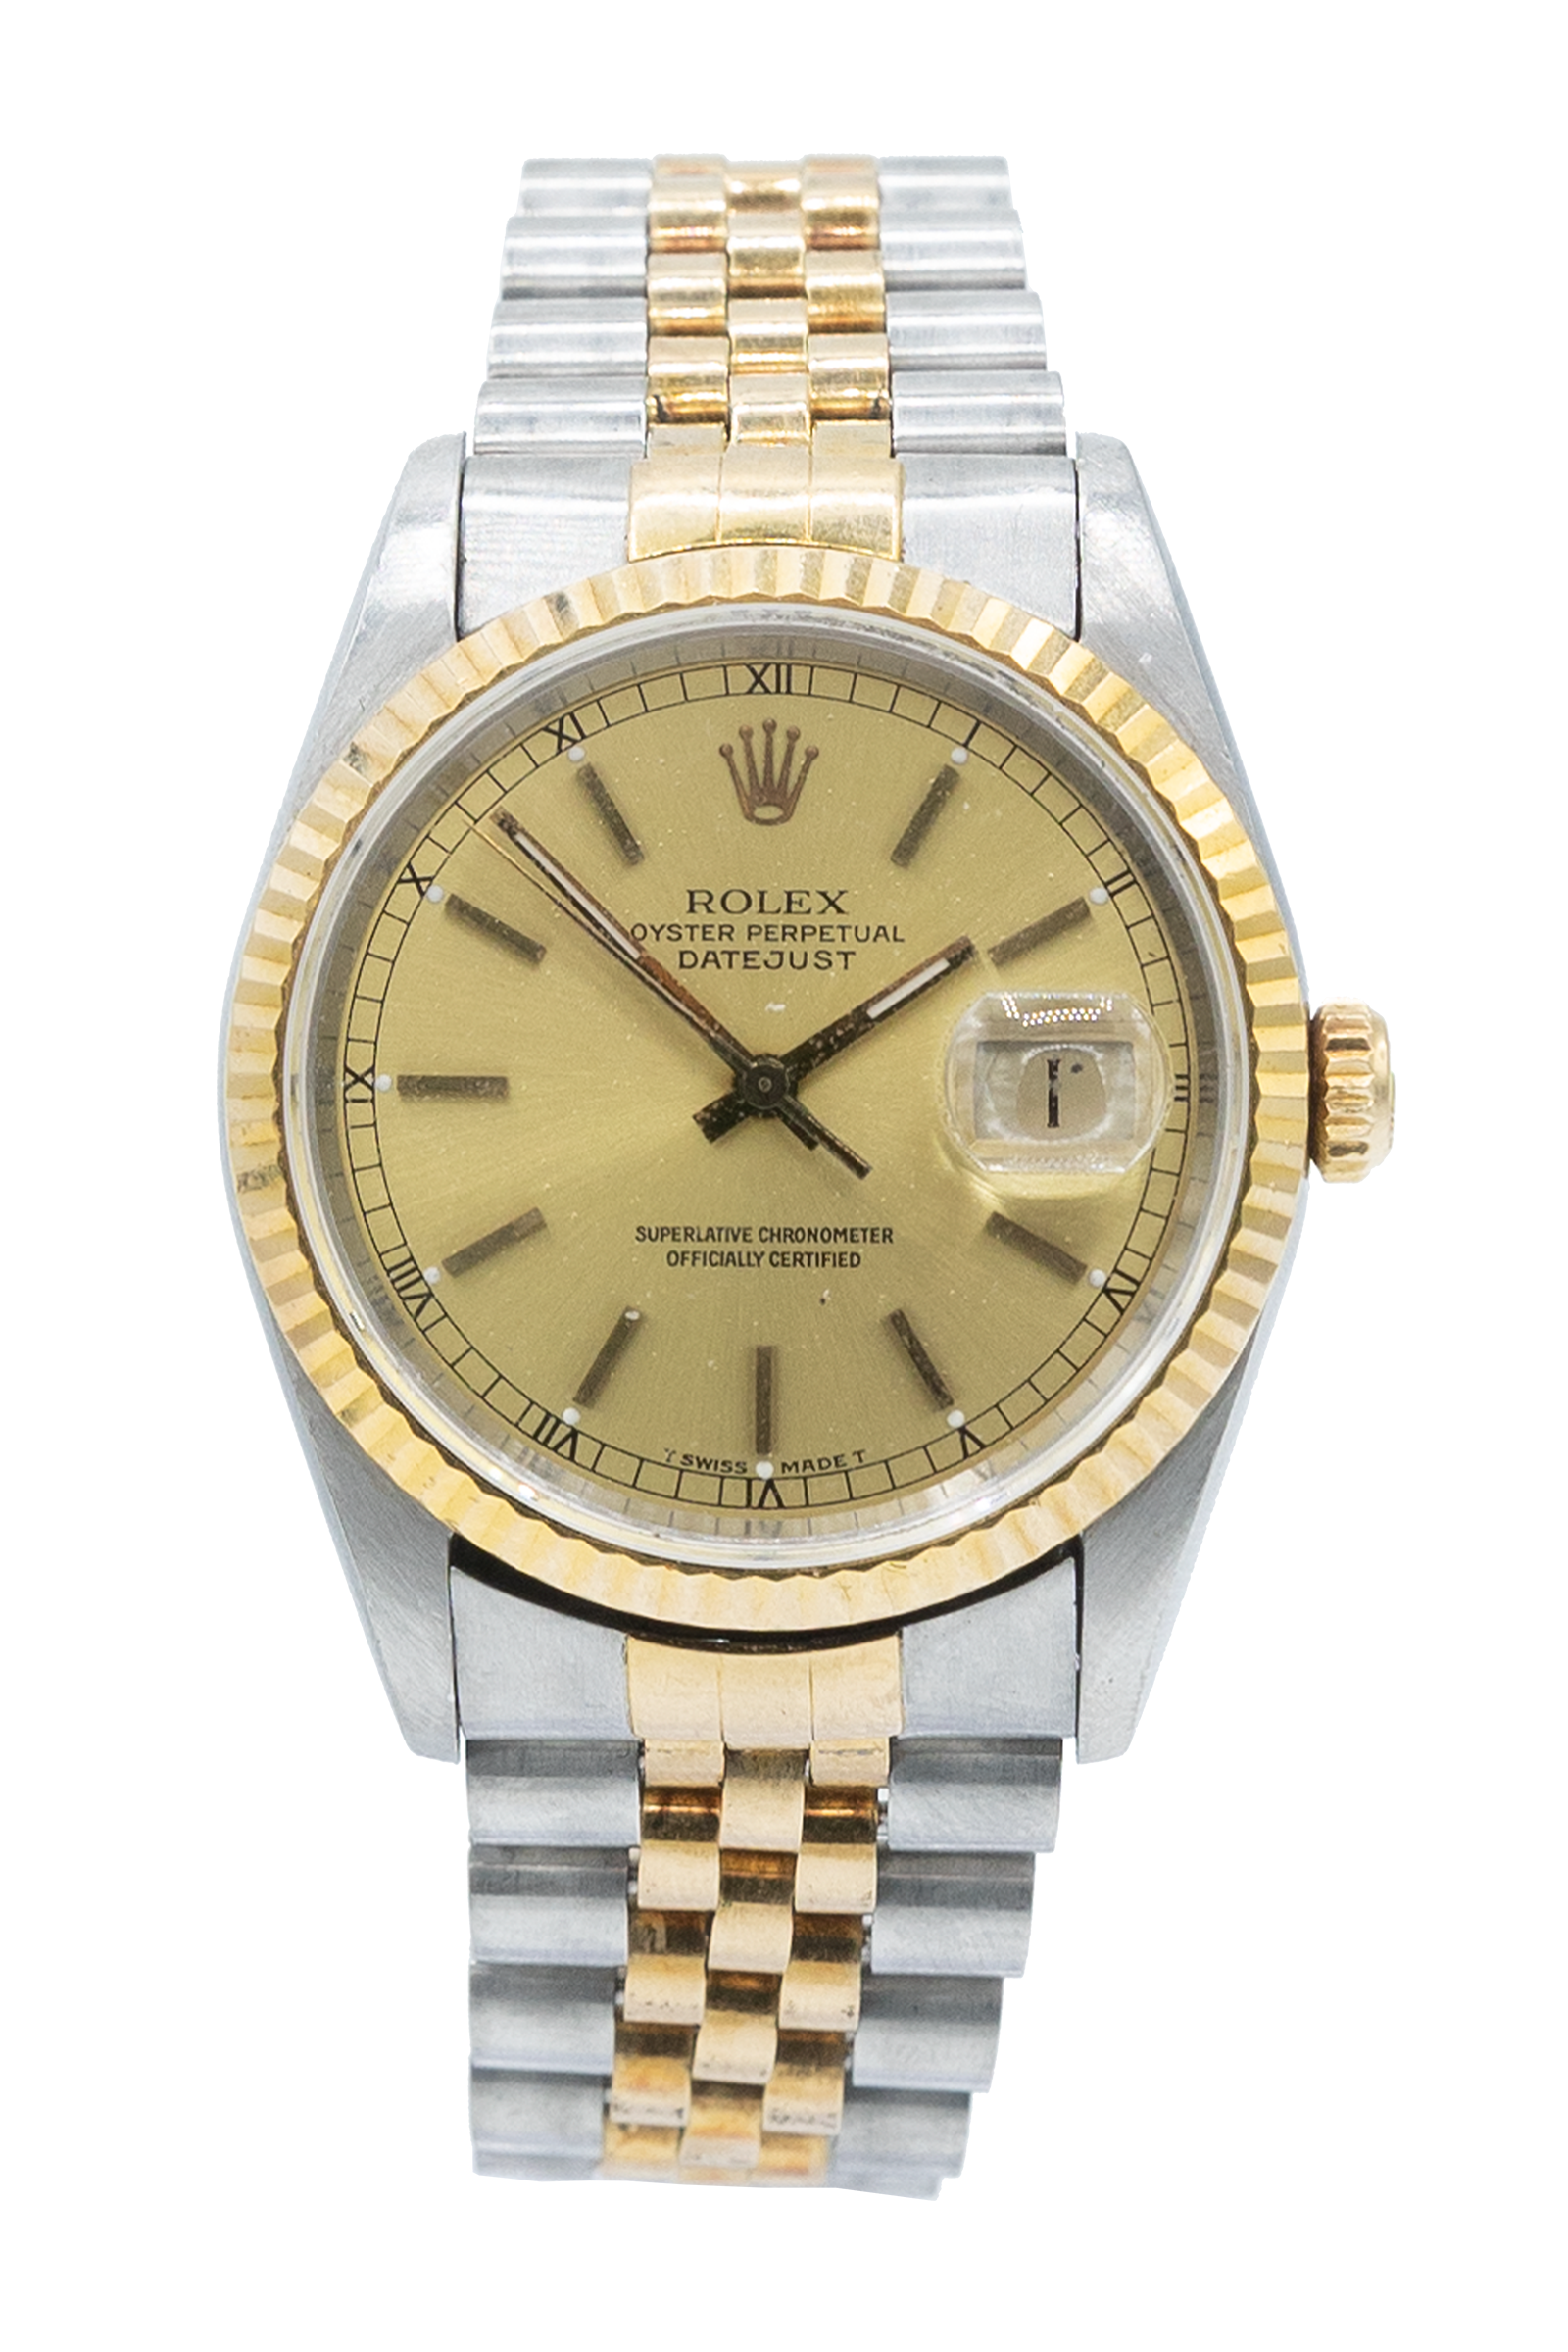 Rolex reference "16233" Datejust steel and yellow gold luxury watch with champagne dial